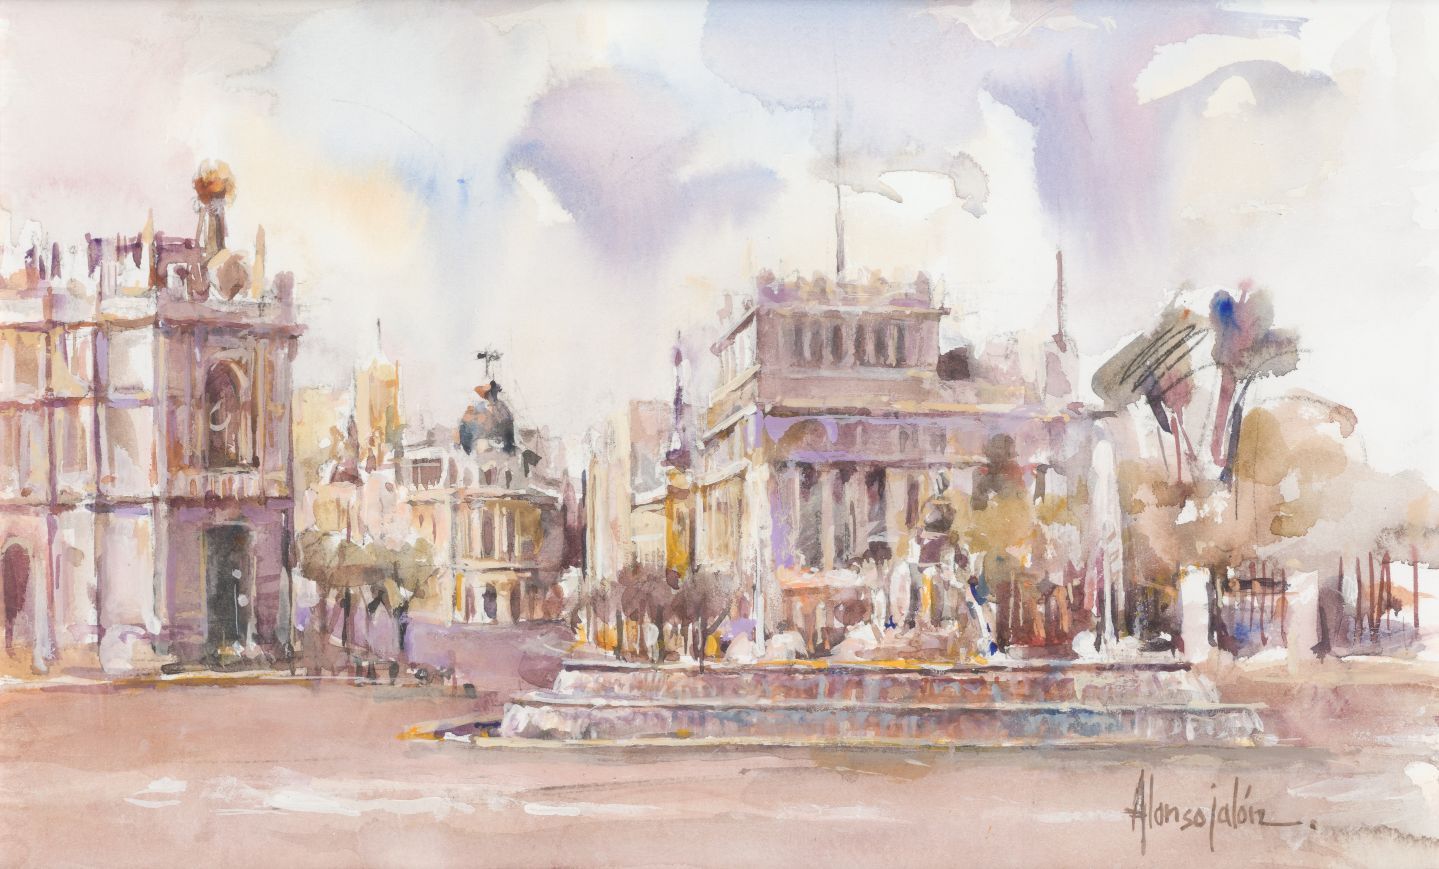 JOSÉ MARÍA ALONSO JALÓN (1951 / .) "Cibeles fountain" Signed in the lower right-&hellip;